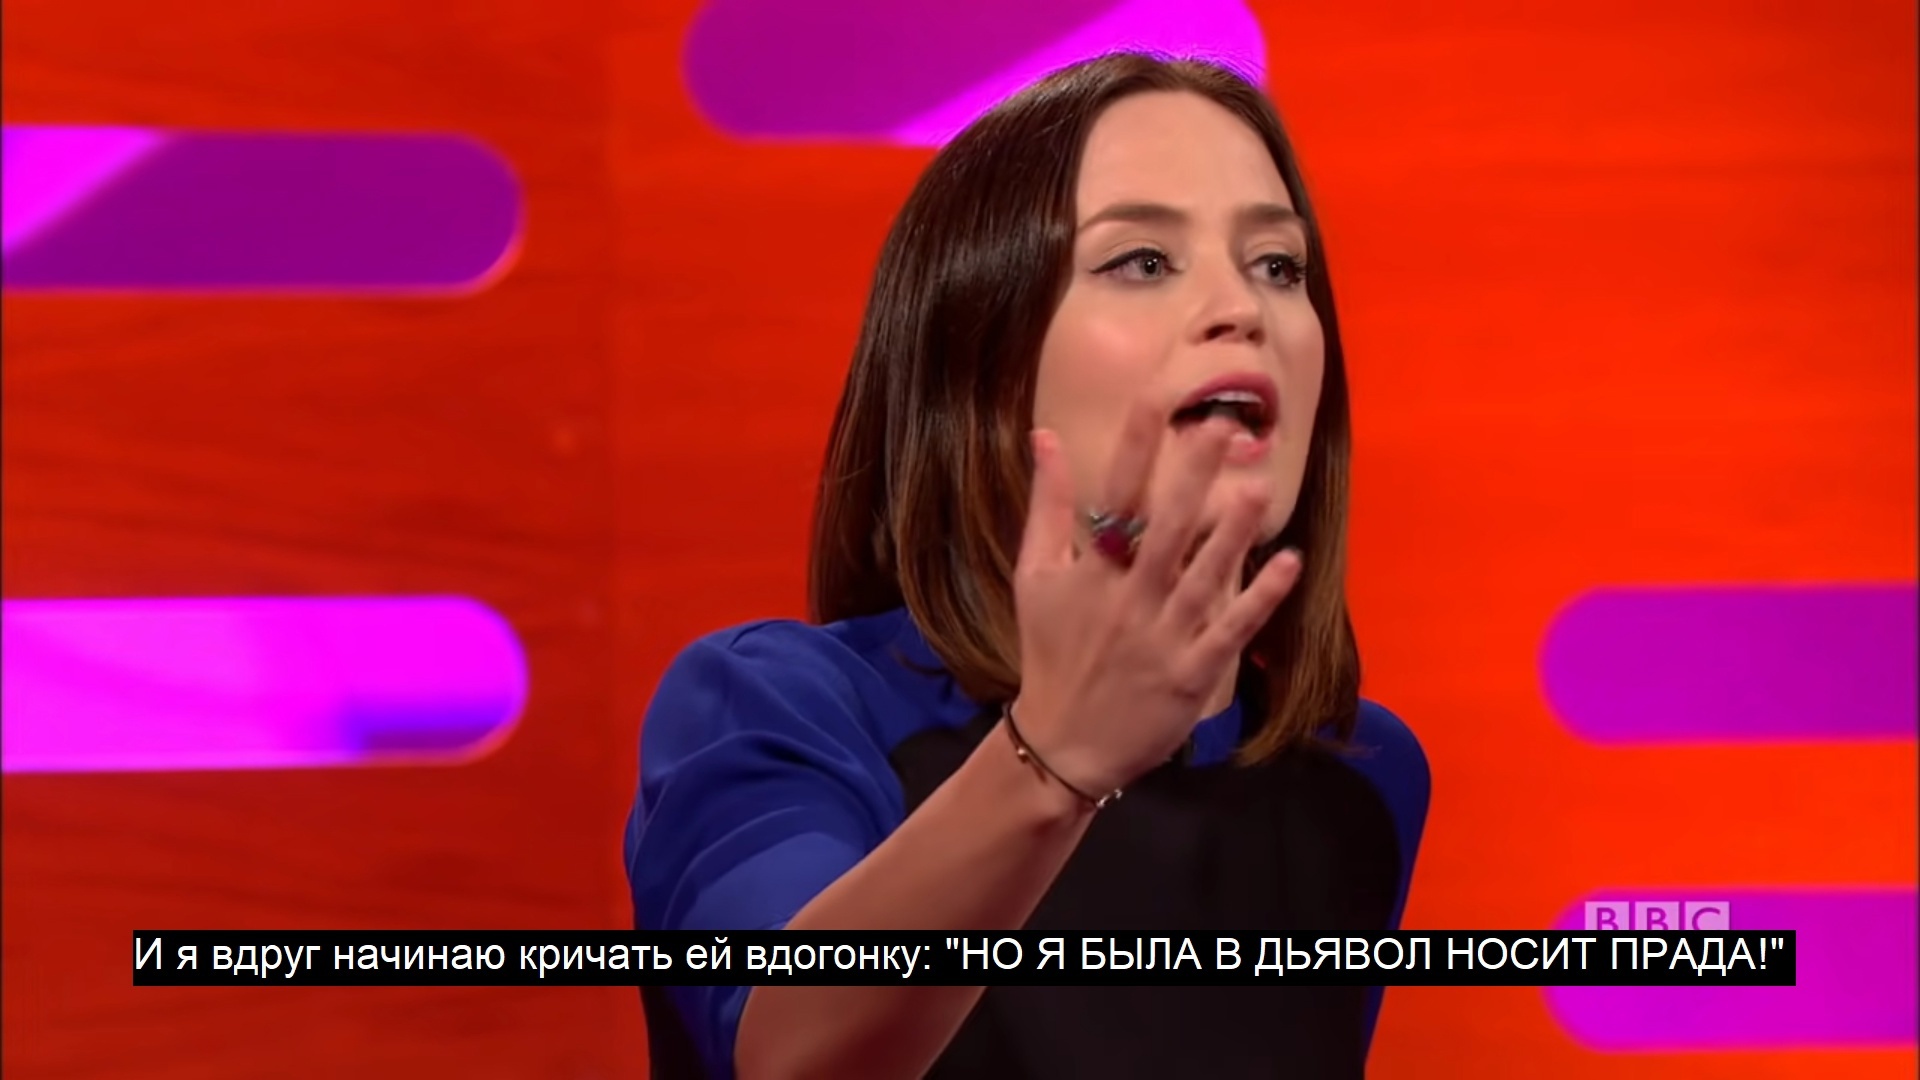 Awkward situation - Emily Blunt, Actors and actresses, Celebrities, Fans, Fans, Storyboard, The Graham Norton Show, Movies, From the network, The Devil Wears a Prada, Awkward moment, Awkwardness, Longpost, 